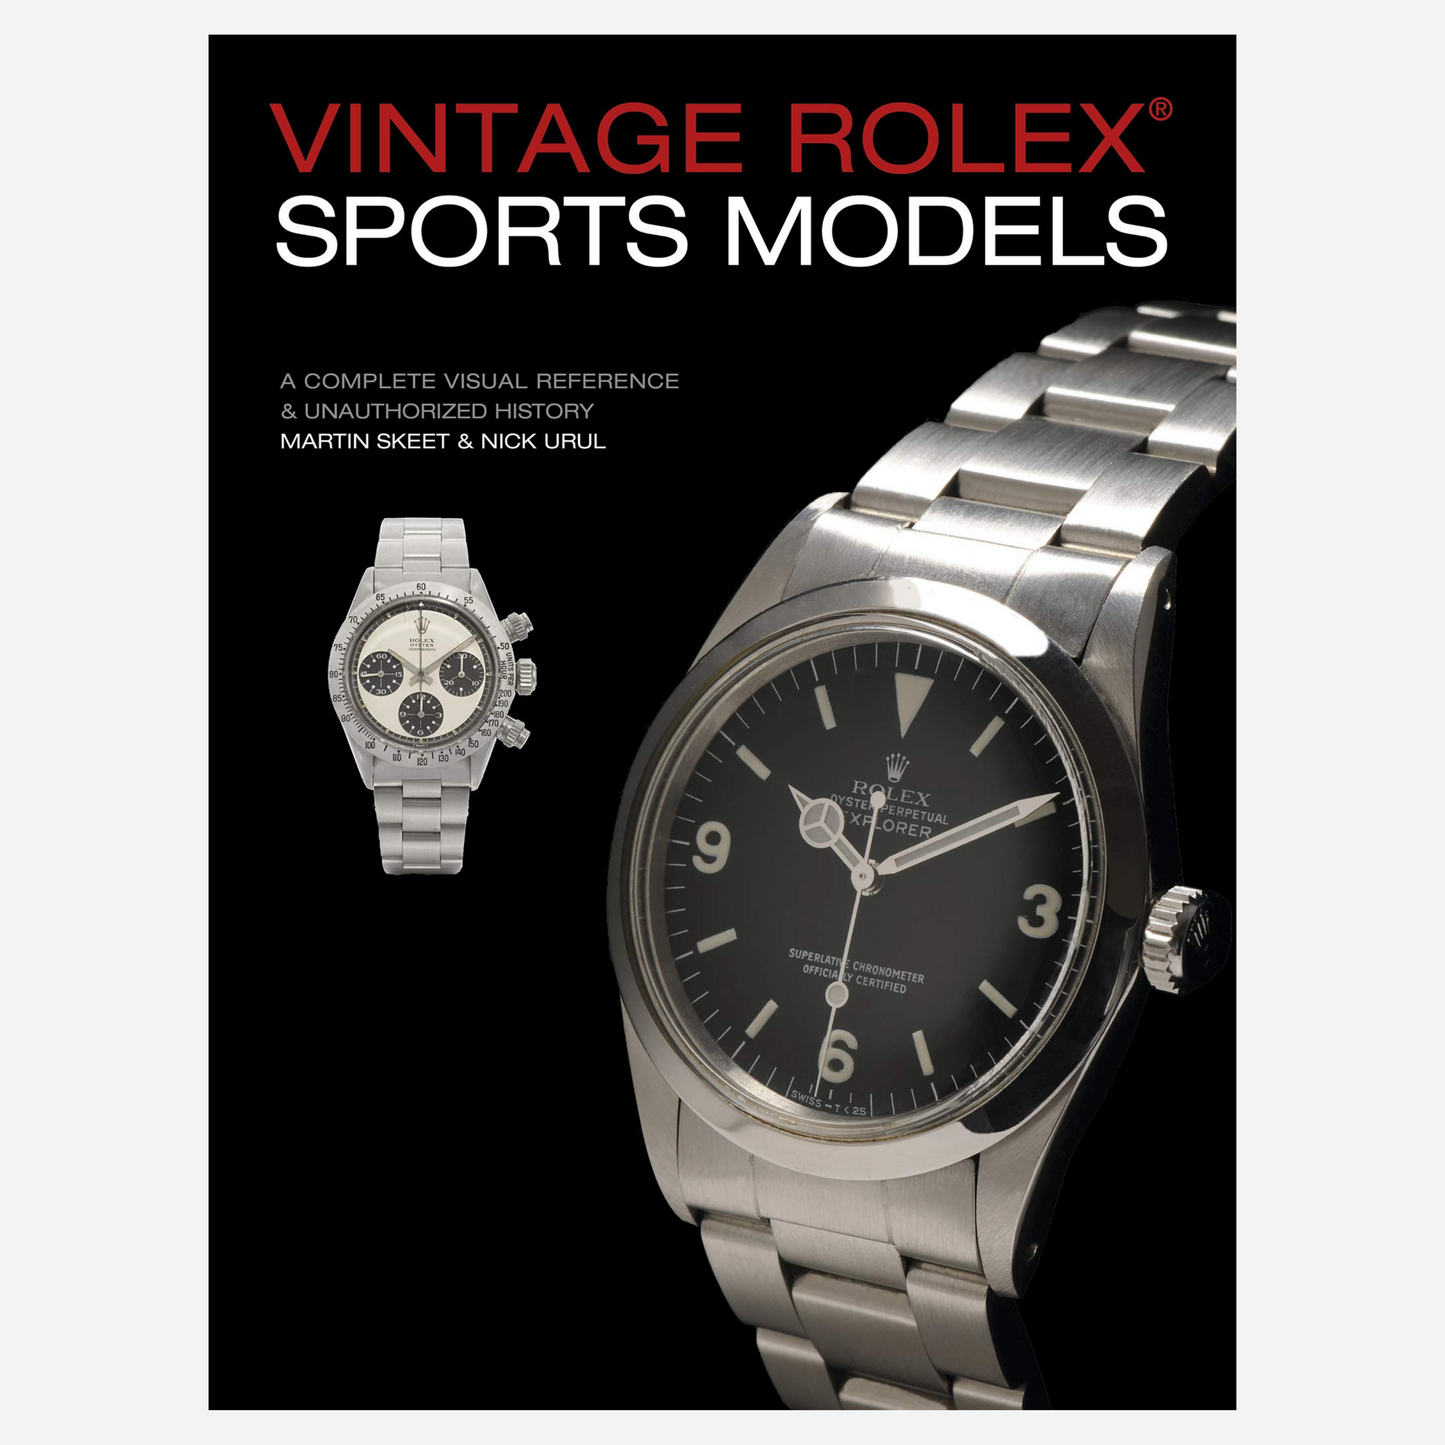 Vintage Rolex Sports Model: A Complete Visual Reference and Unauthorized History (4th Edition)